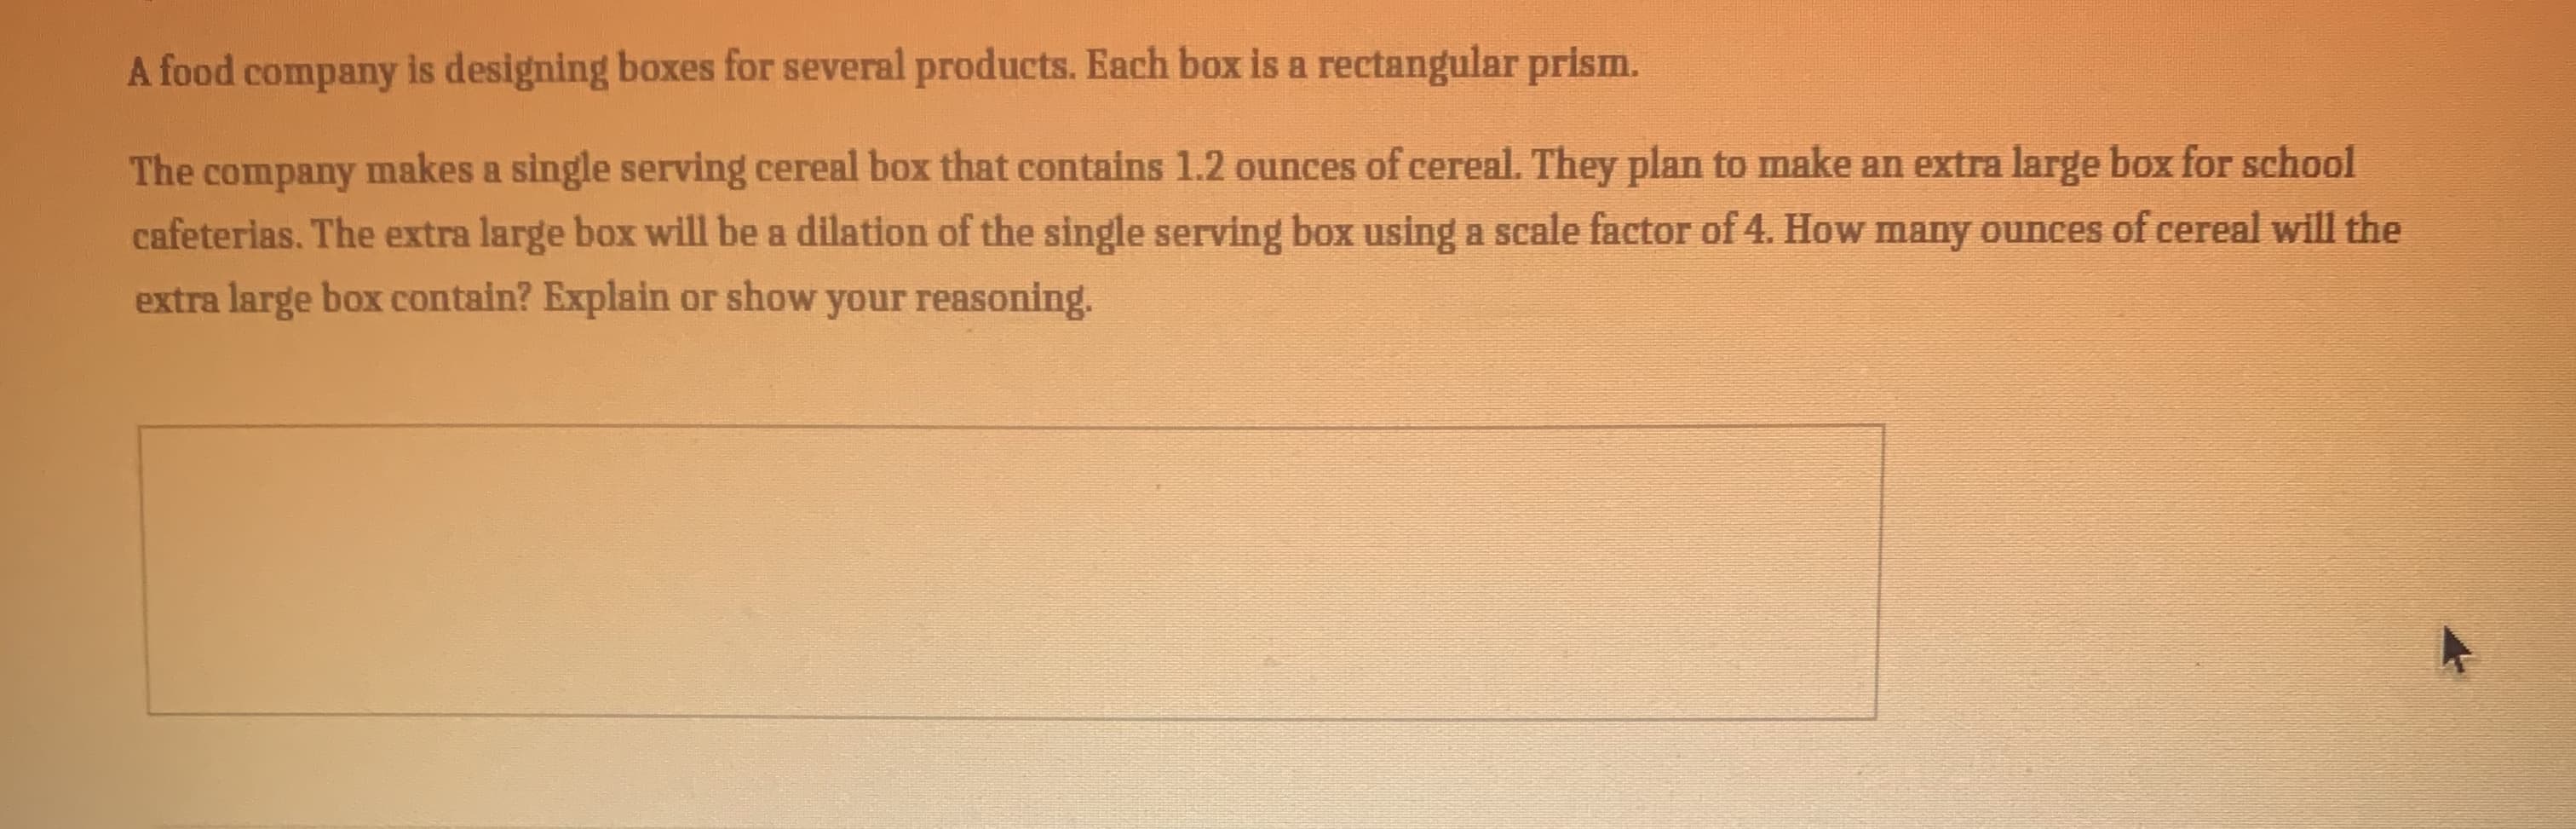 A food company is designing boxes for several products. Each box is a rectangular prism.
The company makes a single serving cereal box that contains 1.2 ounces of cereal. They plan to make an extra large box for school
cafeterias. The extra large box will be a dilation of the single serving box using a scale factor of 4. How many ounces of cereal will the
extra large box contain? Explain or show your reasoning.
